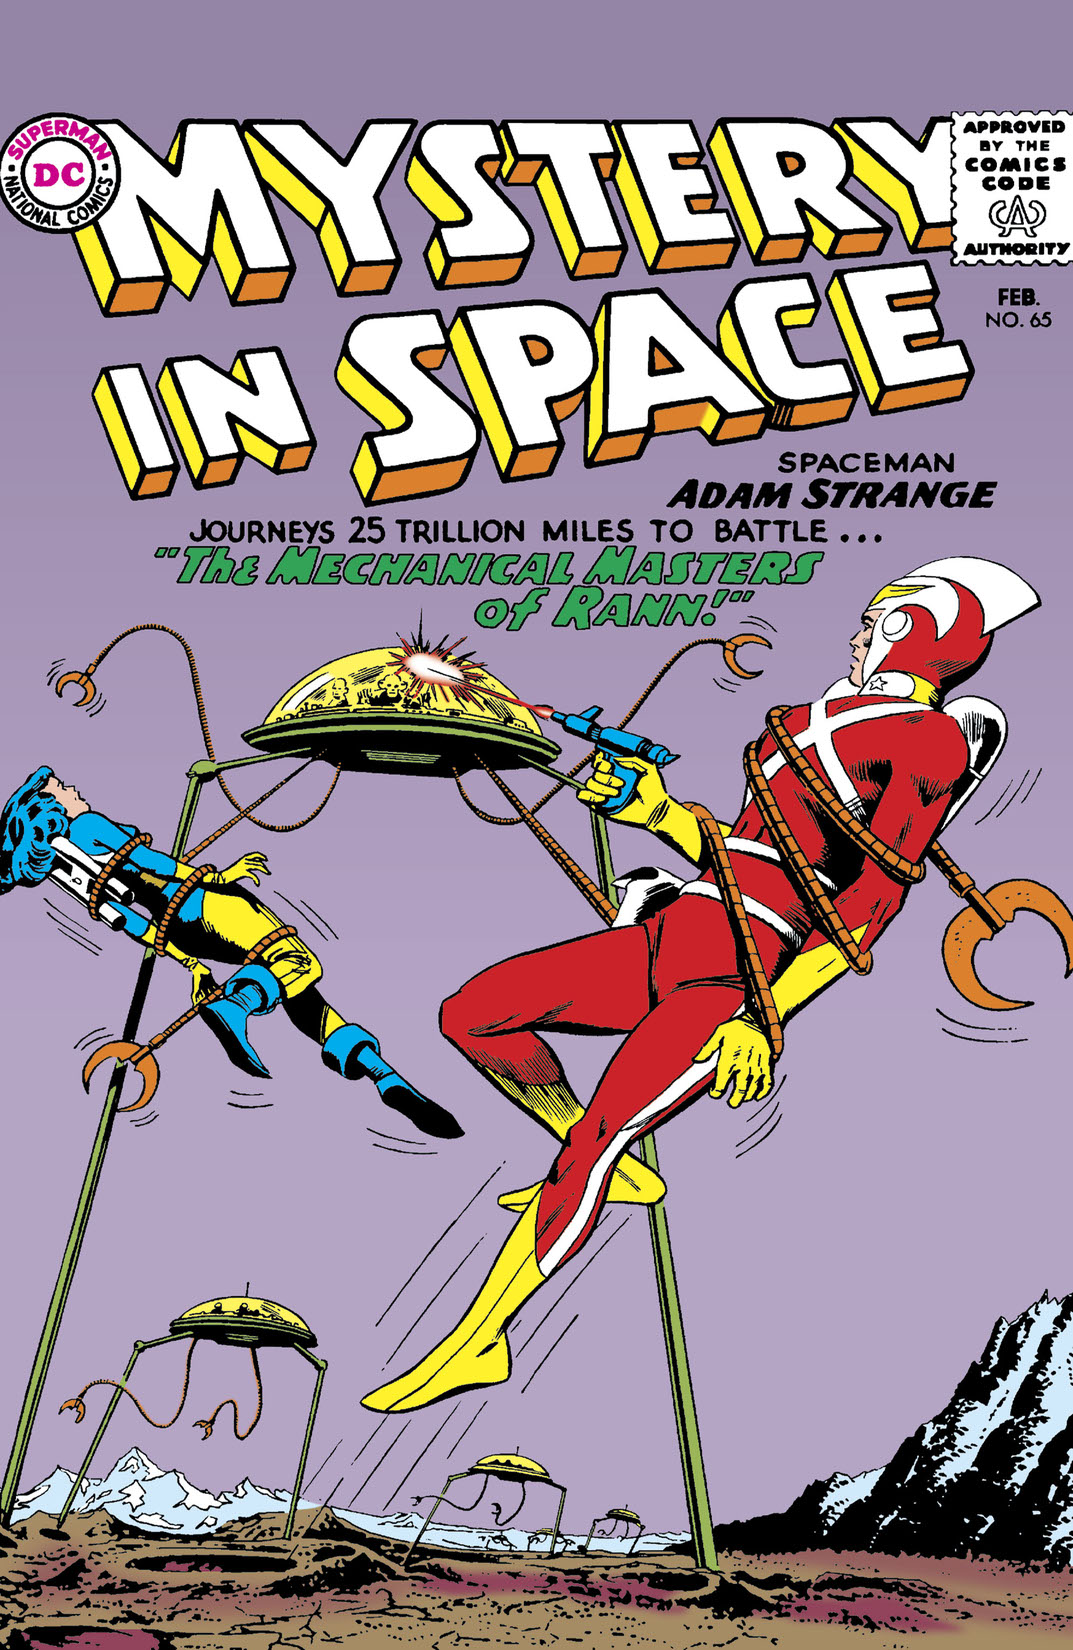 Mystery in Space (1951-) #65 preview images